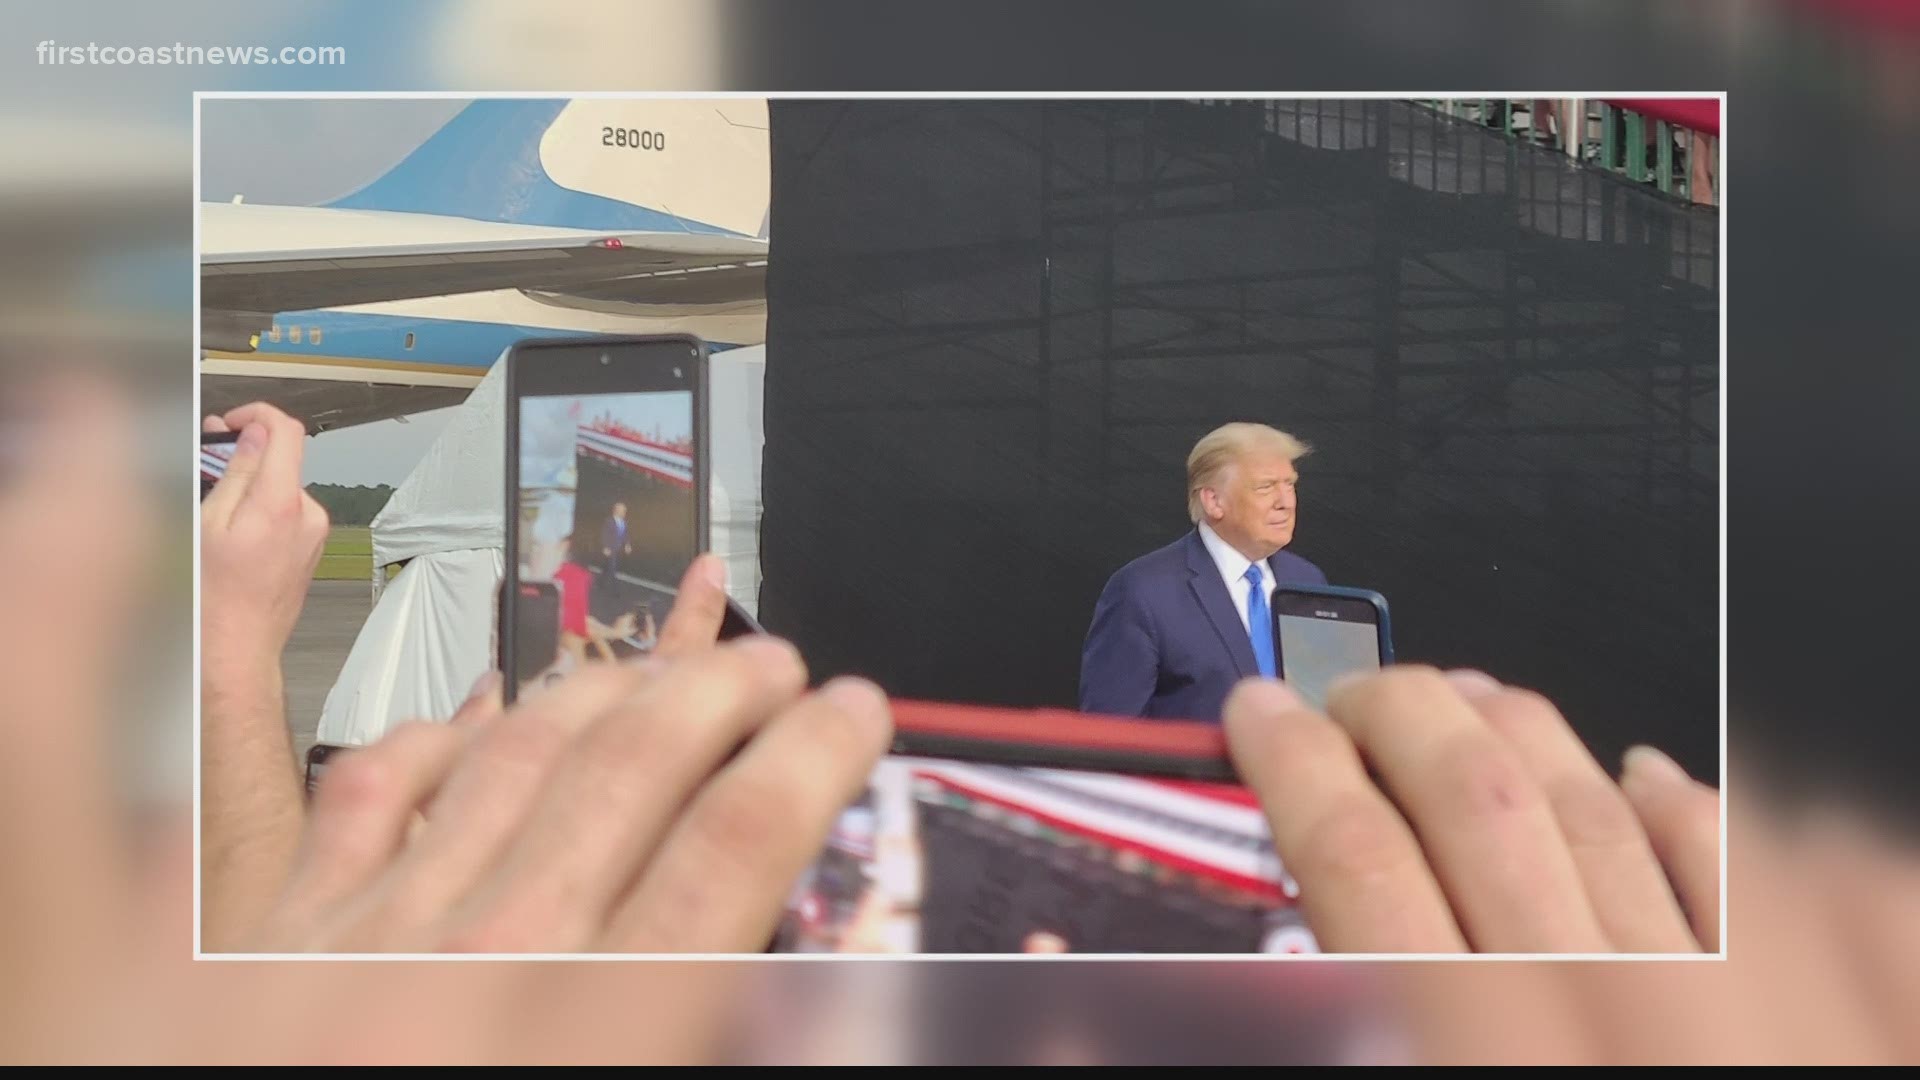 The president spoke at the event, revealing that he would be announcing his Supreme Court nominee on Saturday. He only revealed it would be a woman.